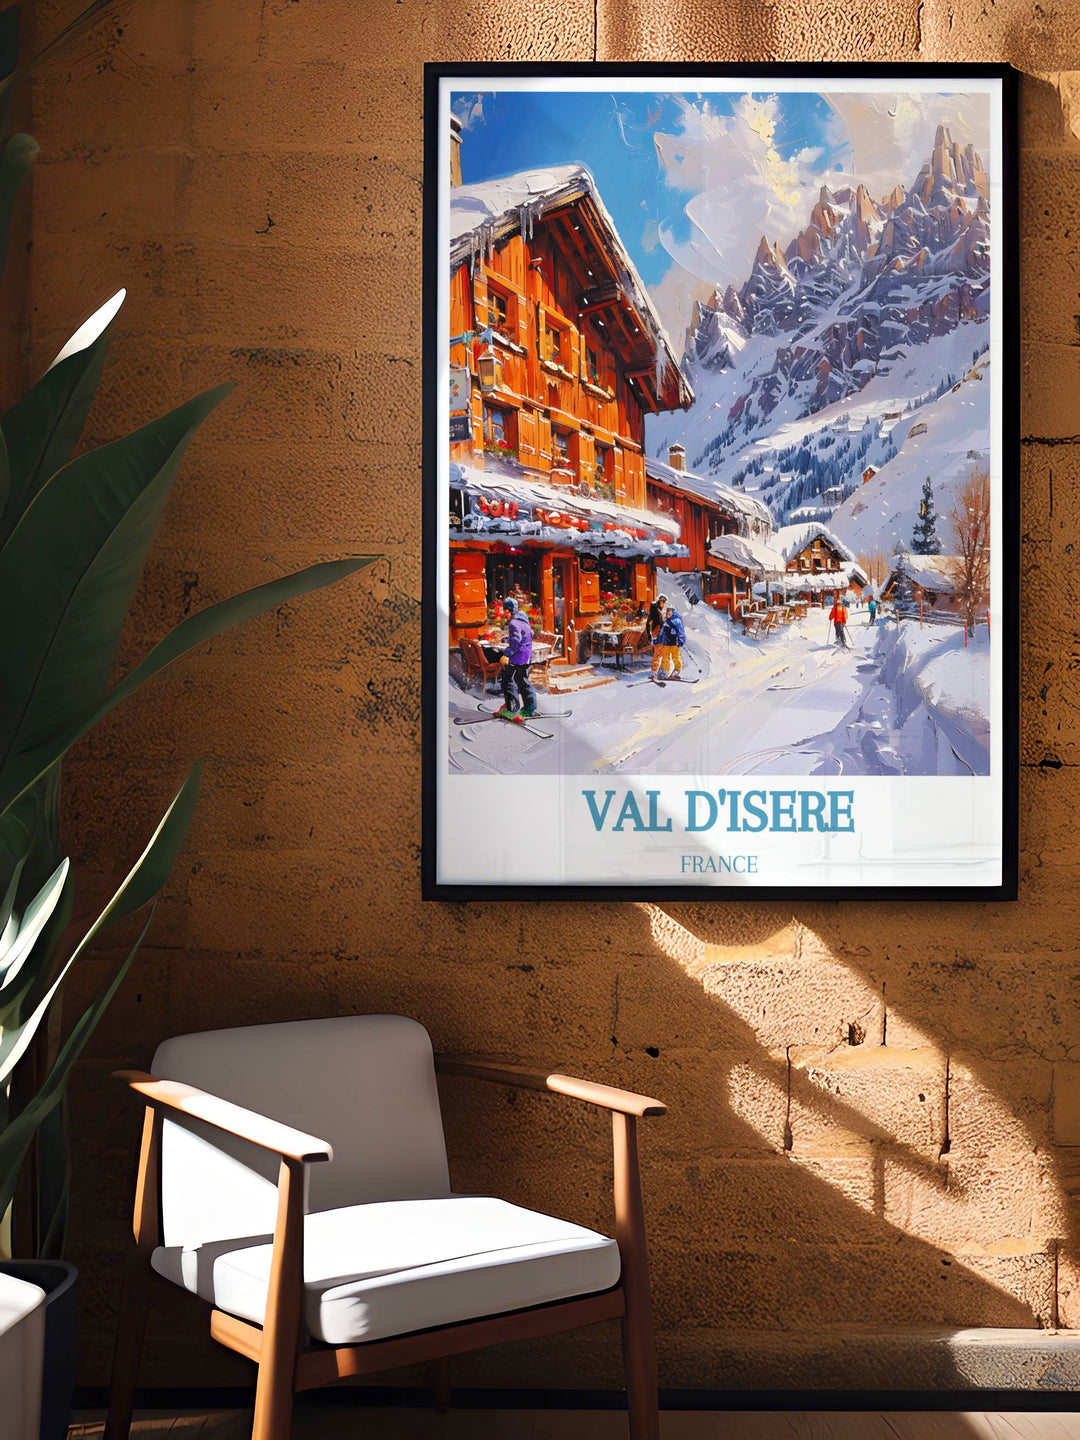 Val dIsère Solaise print with a vintage design, celebrating the history and tradition of skiing in the French Alps. Adds a touch of elegance and nostalgia to any space.